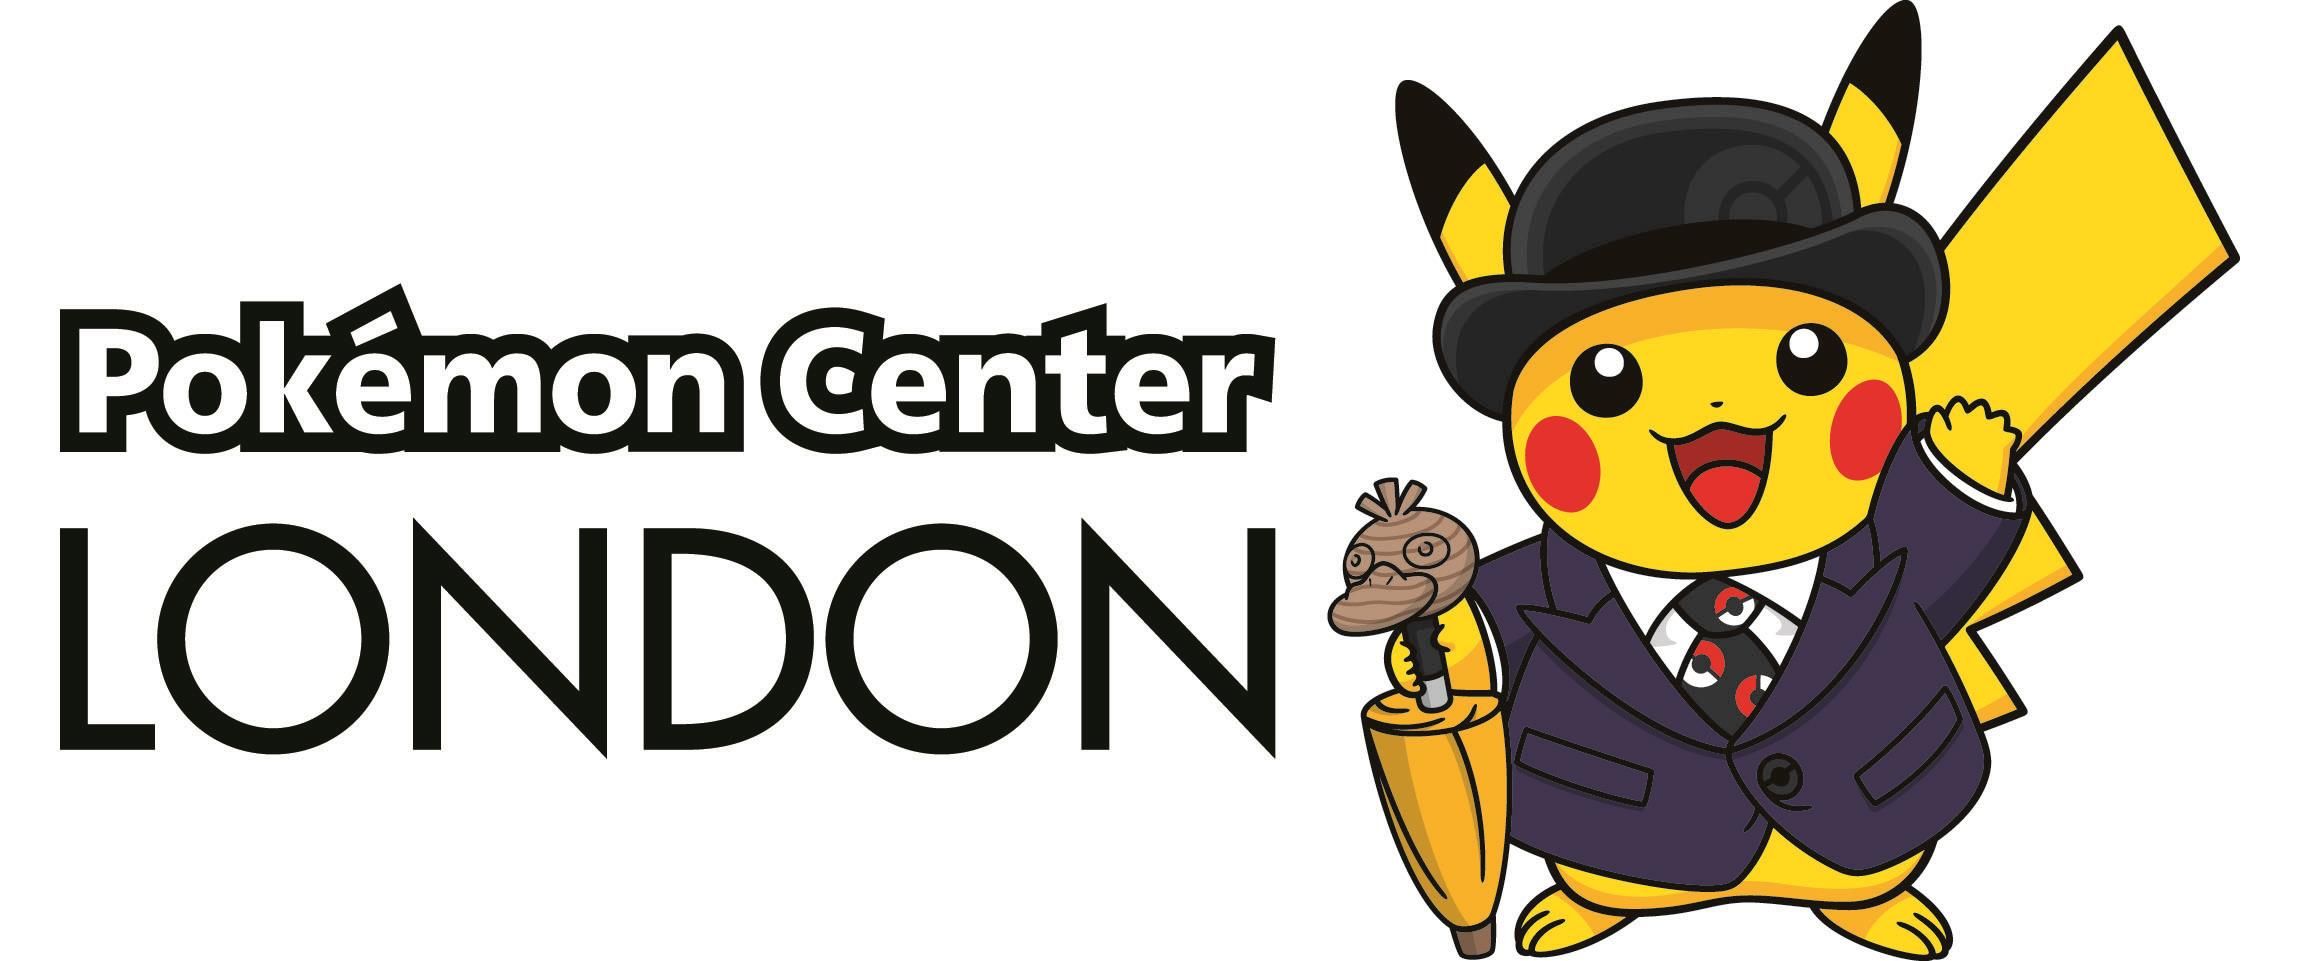 Pokemon Center Store Coming To London At Last image 2